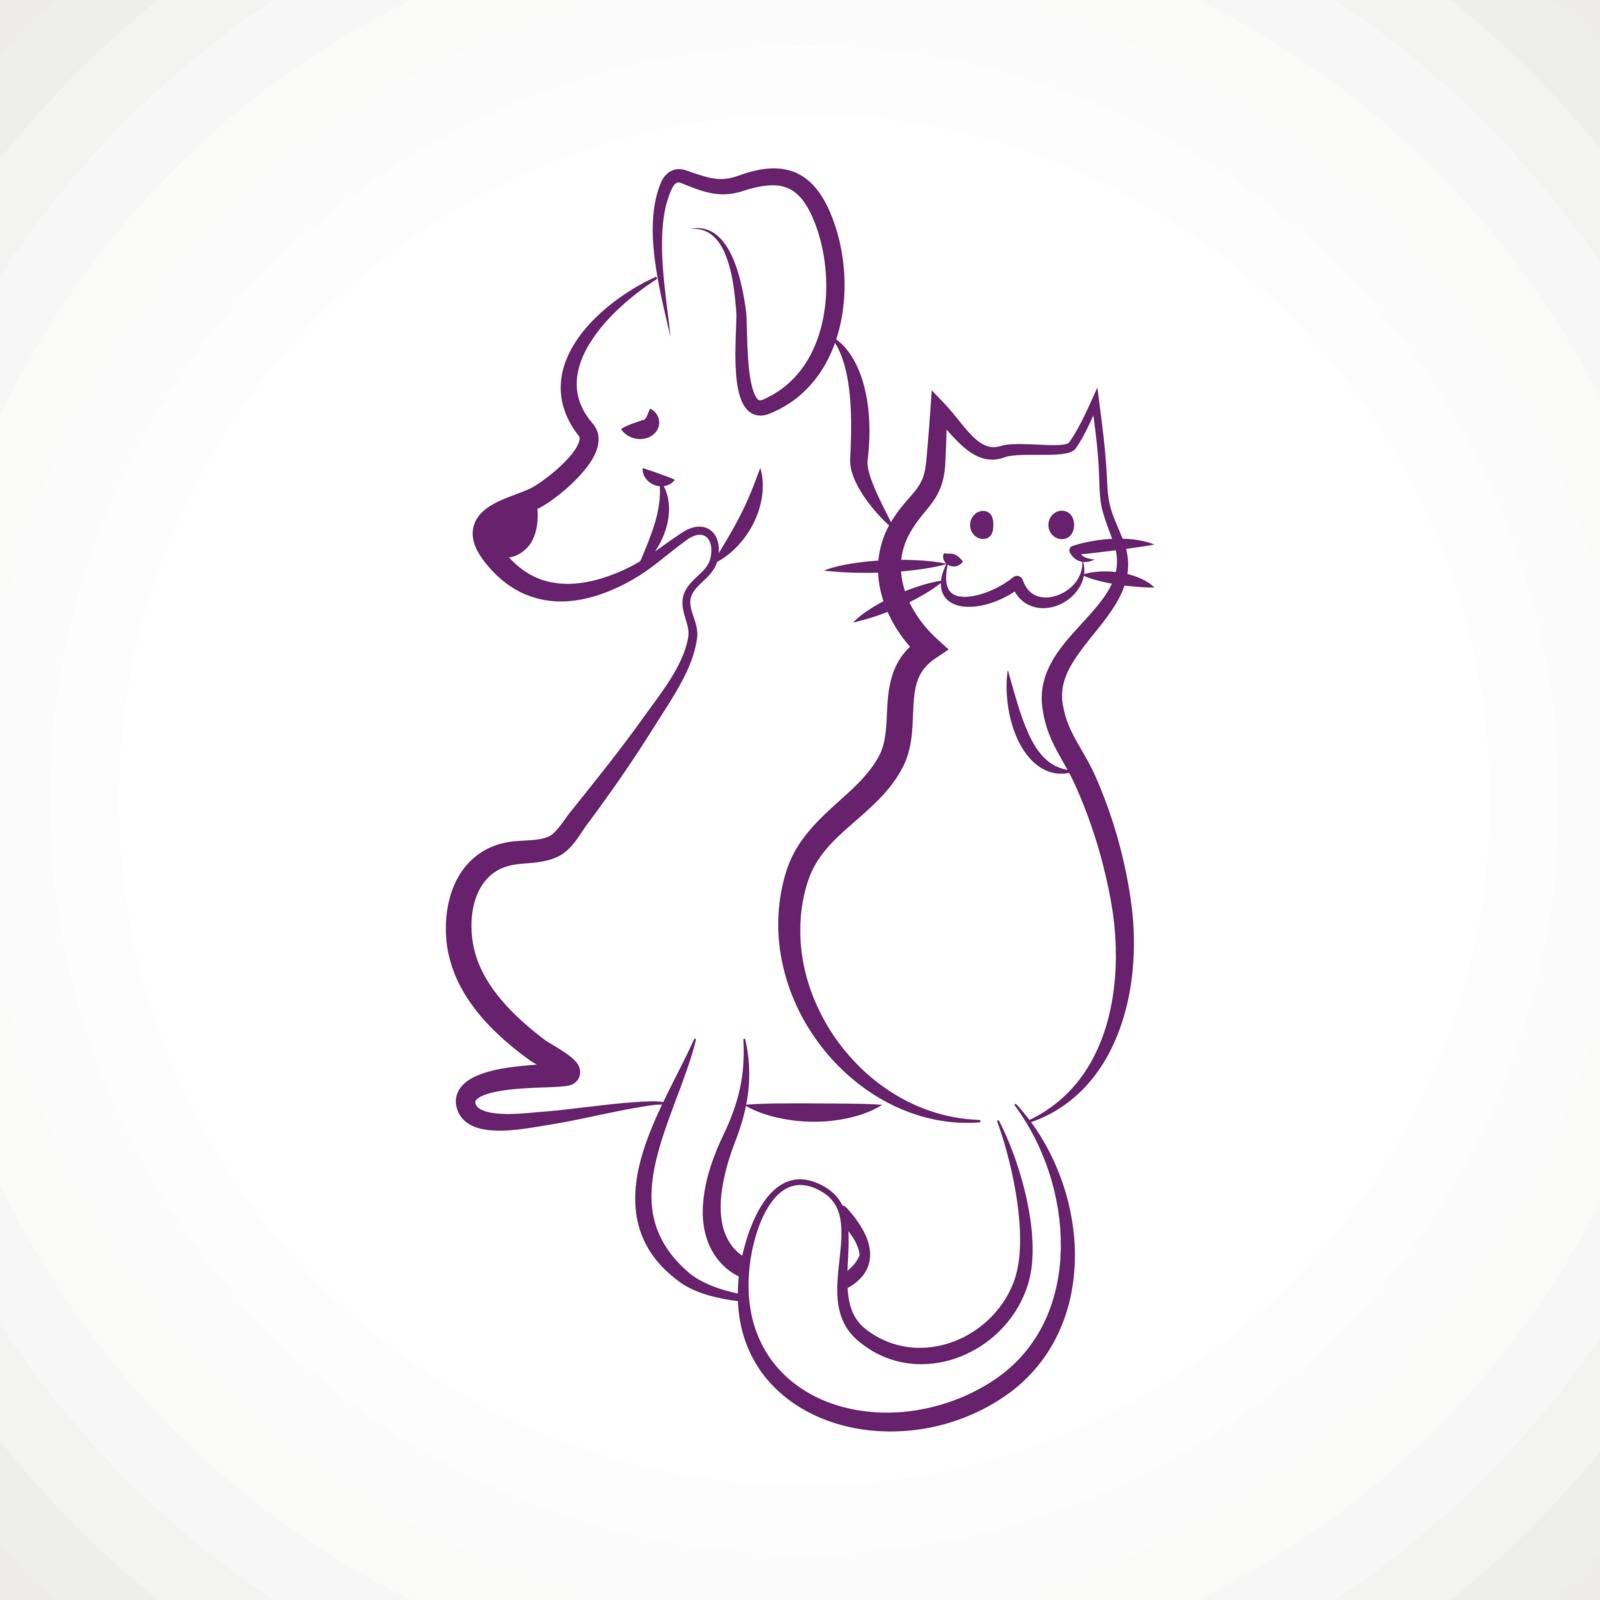 cat and dog - freehand vector illustration